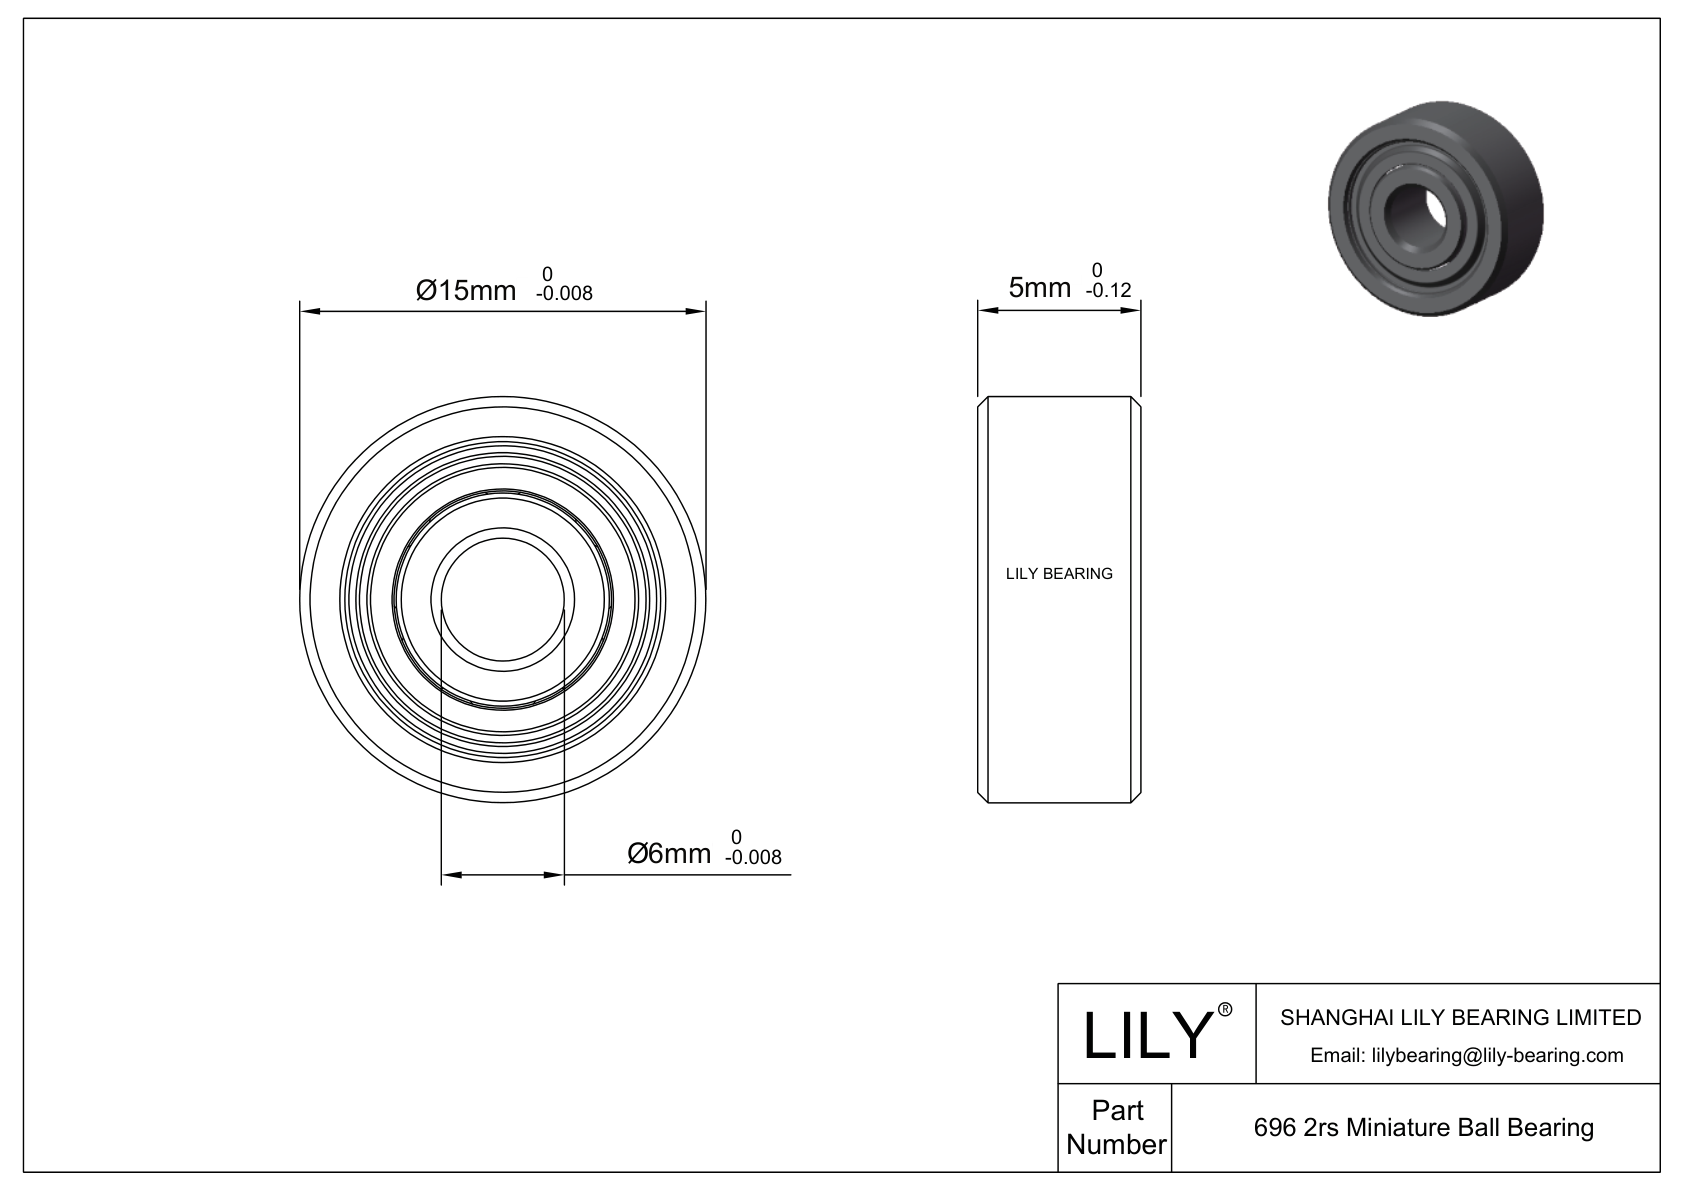 LILY-BS69618-7 POM Coated Bearing cad drawing